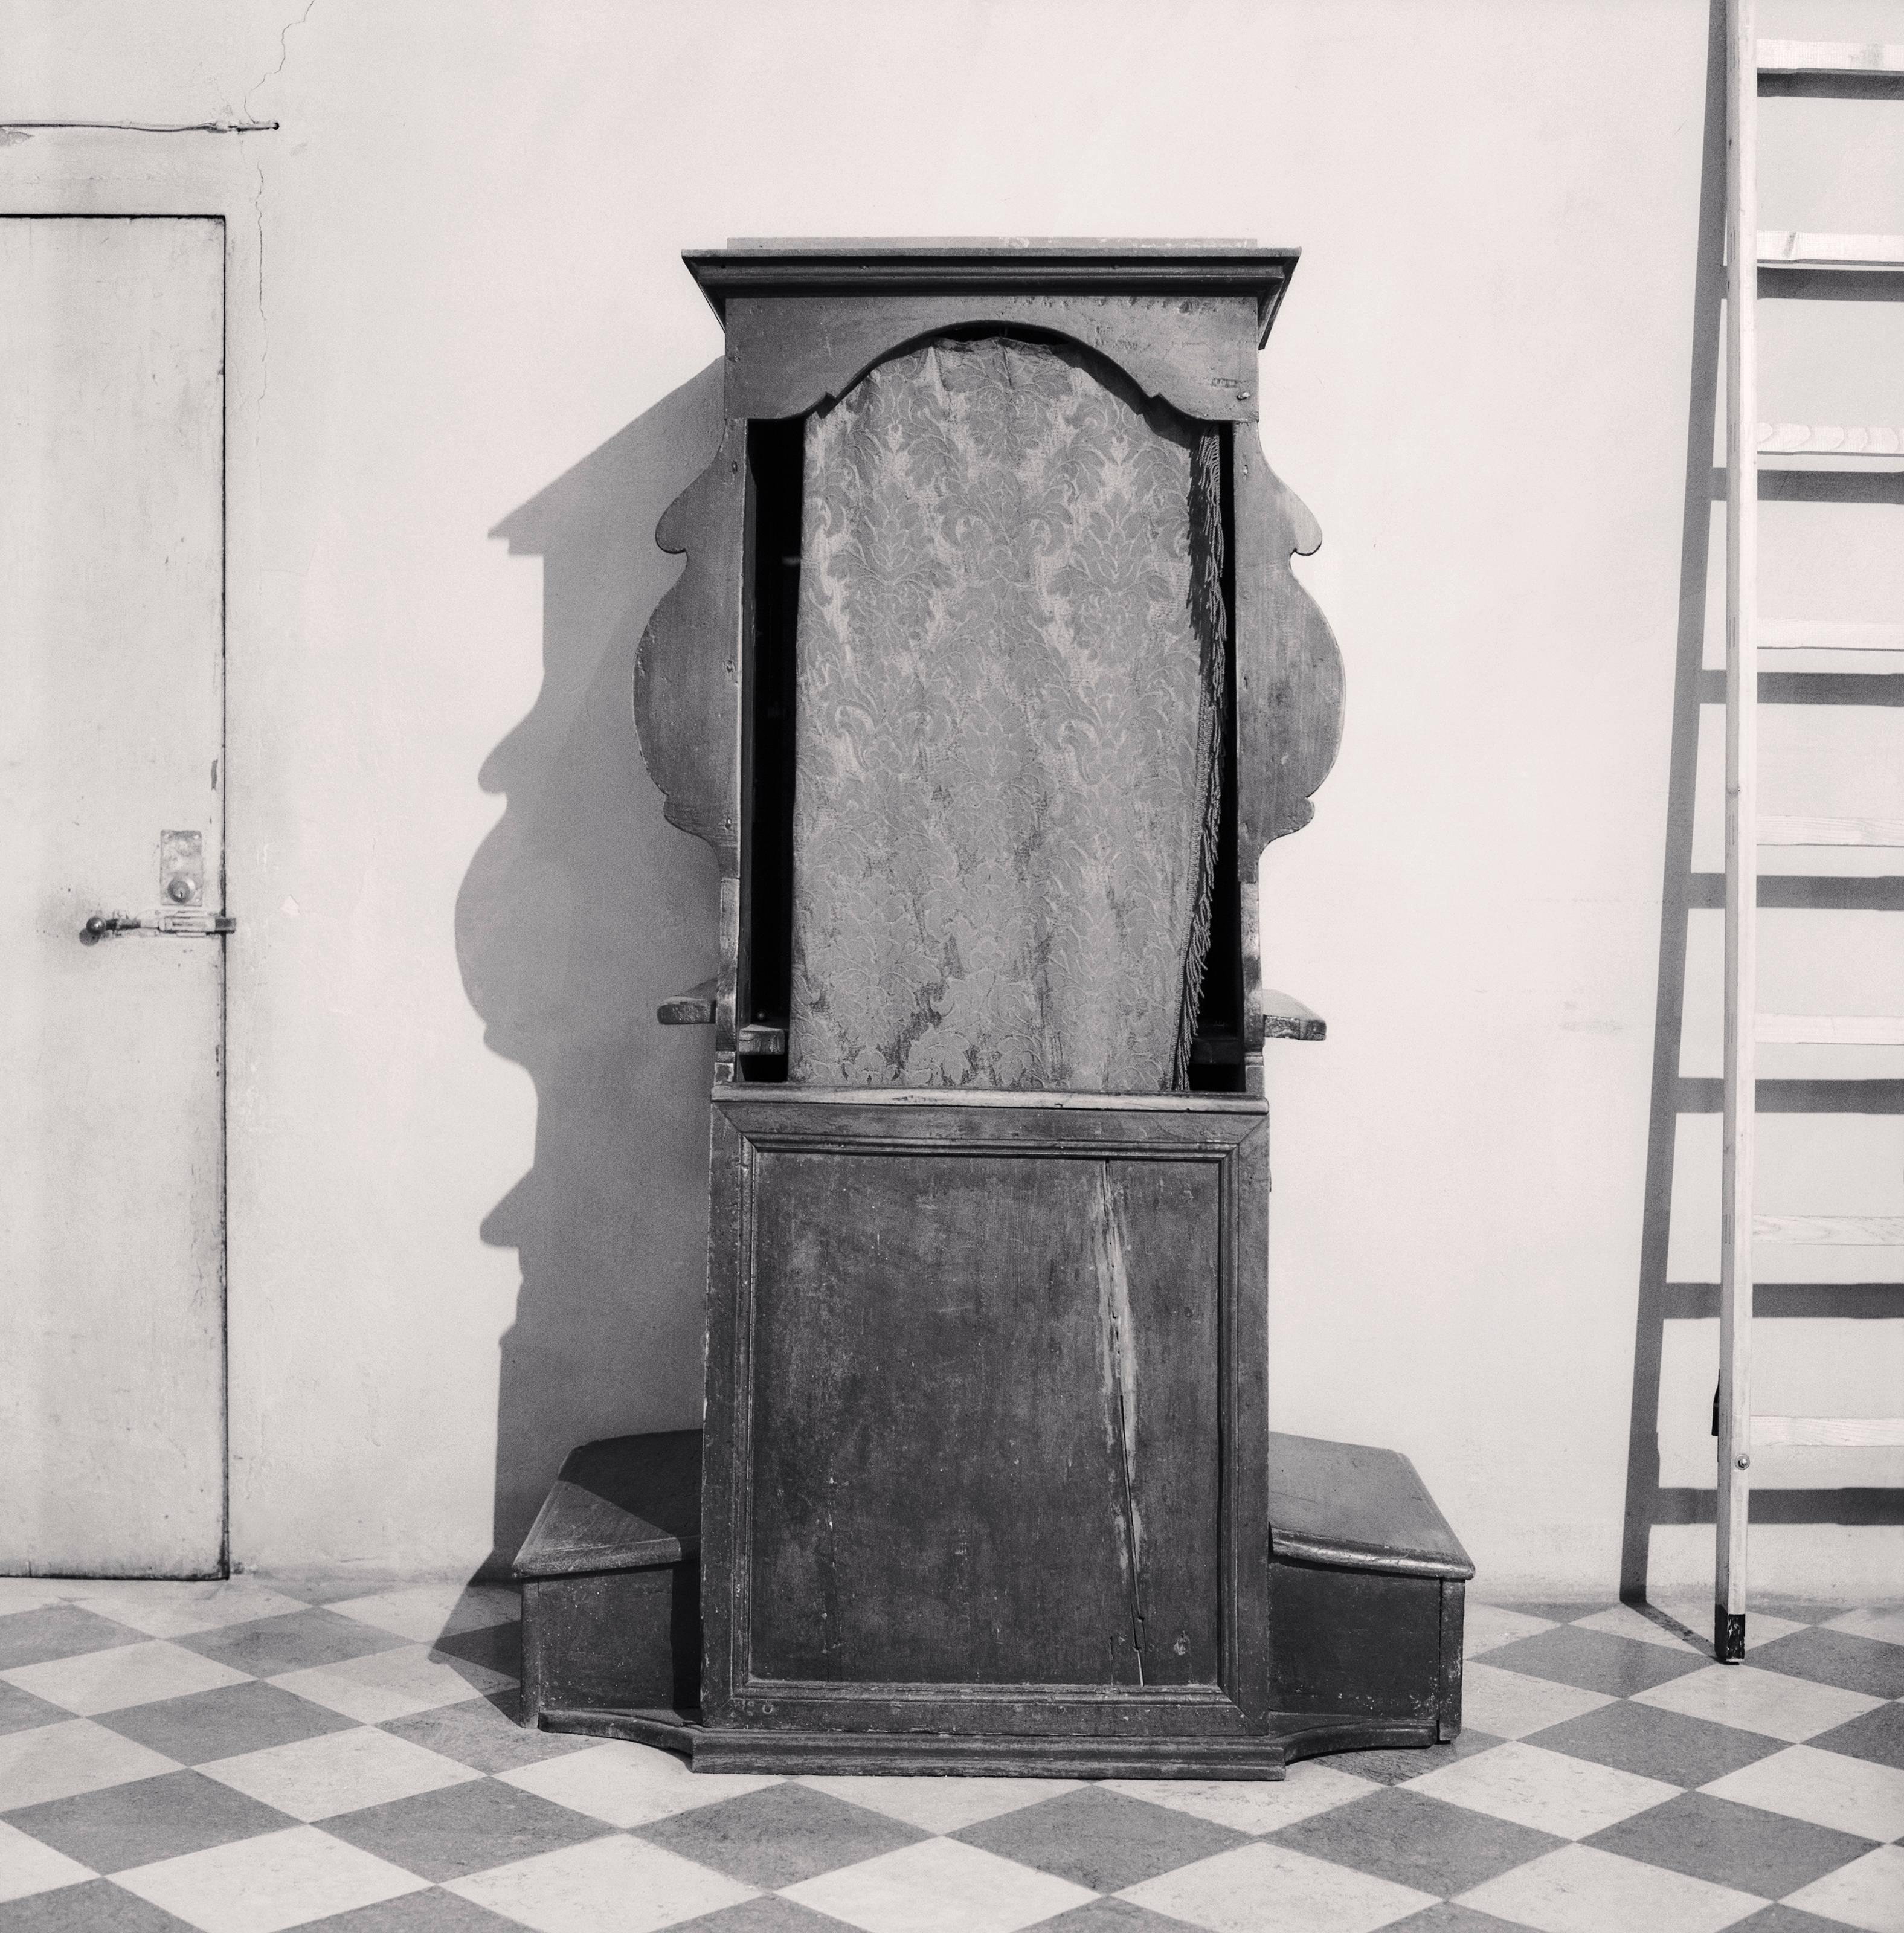 Confessional Study 22, Chiesa di san Giovanni Evangelista in Santo Stefano Protomartire, Reggio Emilia, Italy, 2007

Signed, dated and numbered on mount
Signed, dated, inscribed with title and stamped with photographer's copyright ink stamp on